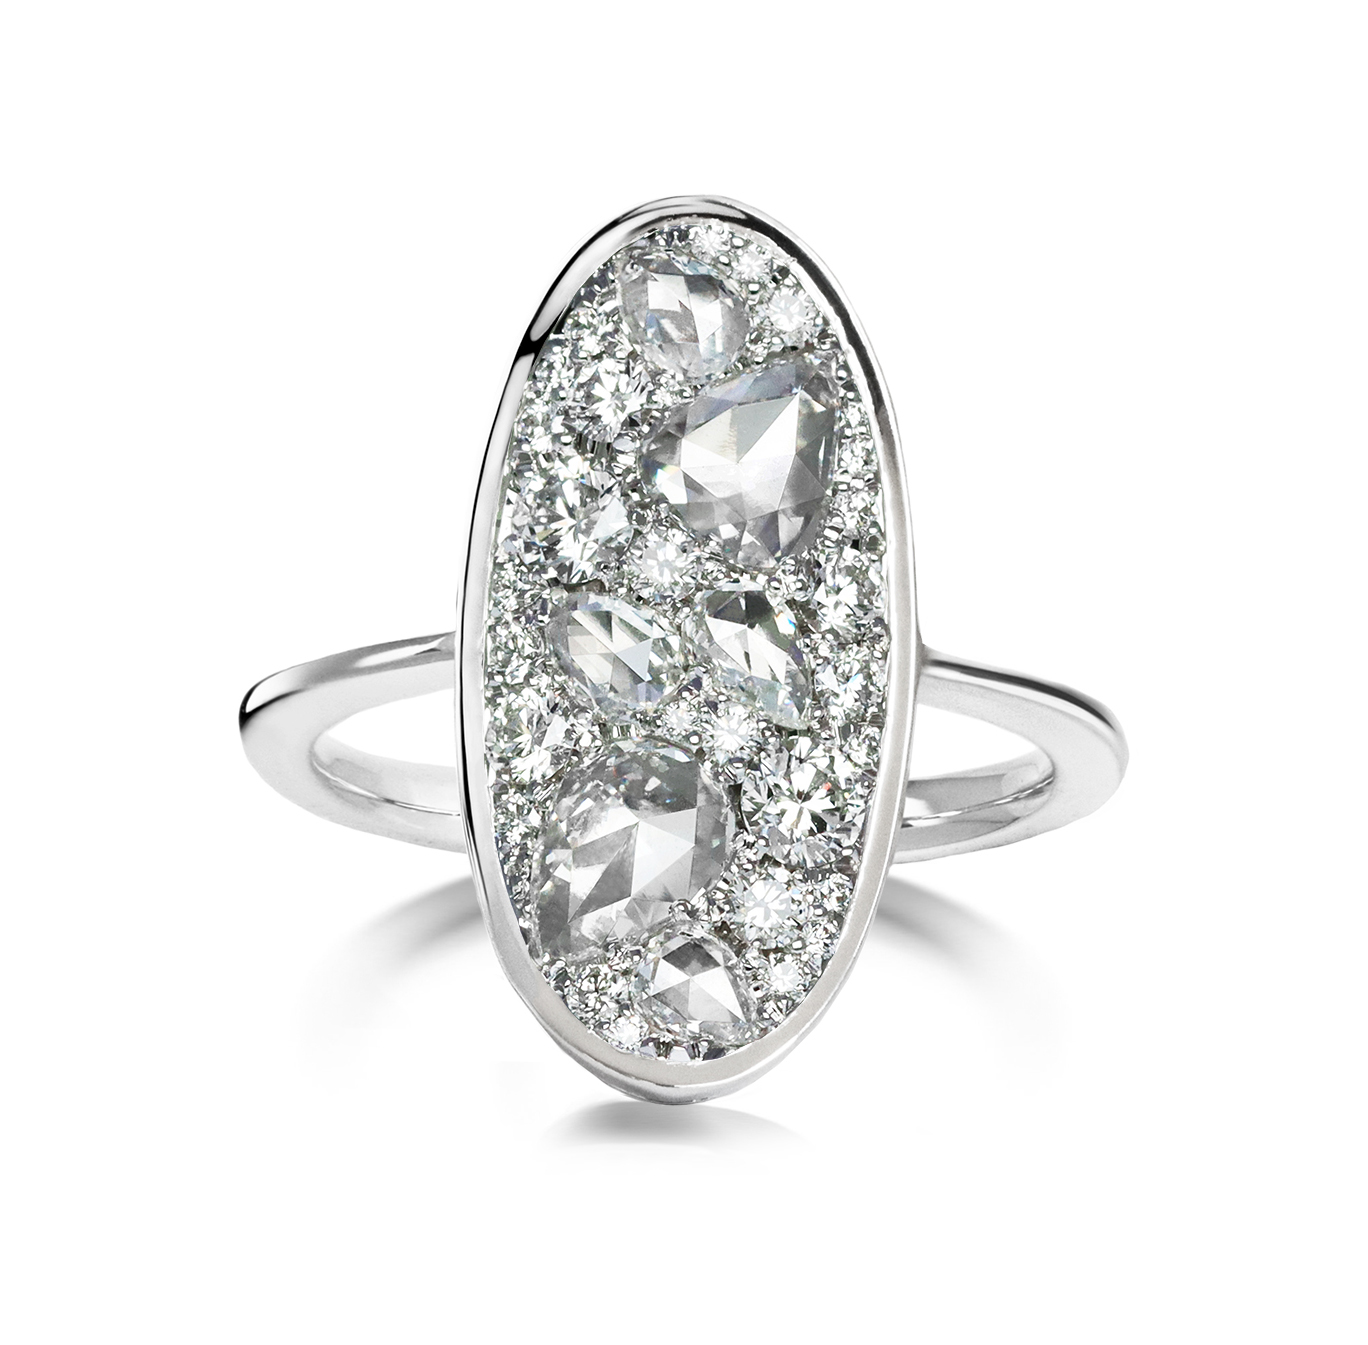 White gold ring with brilliant and rosecut diamonds.